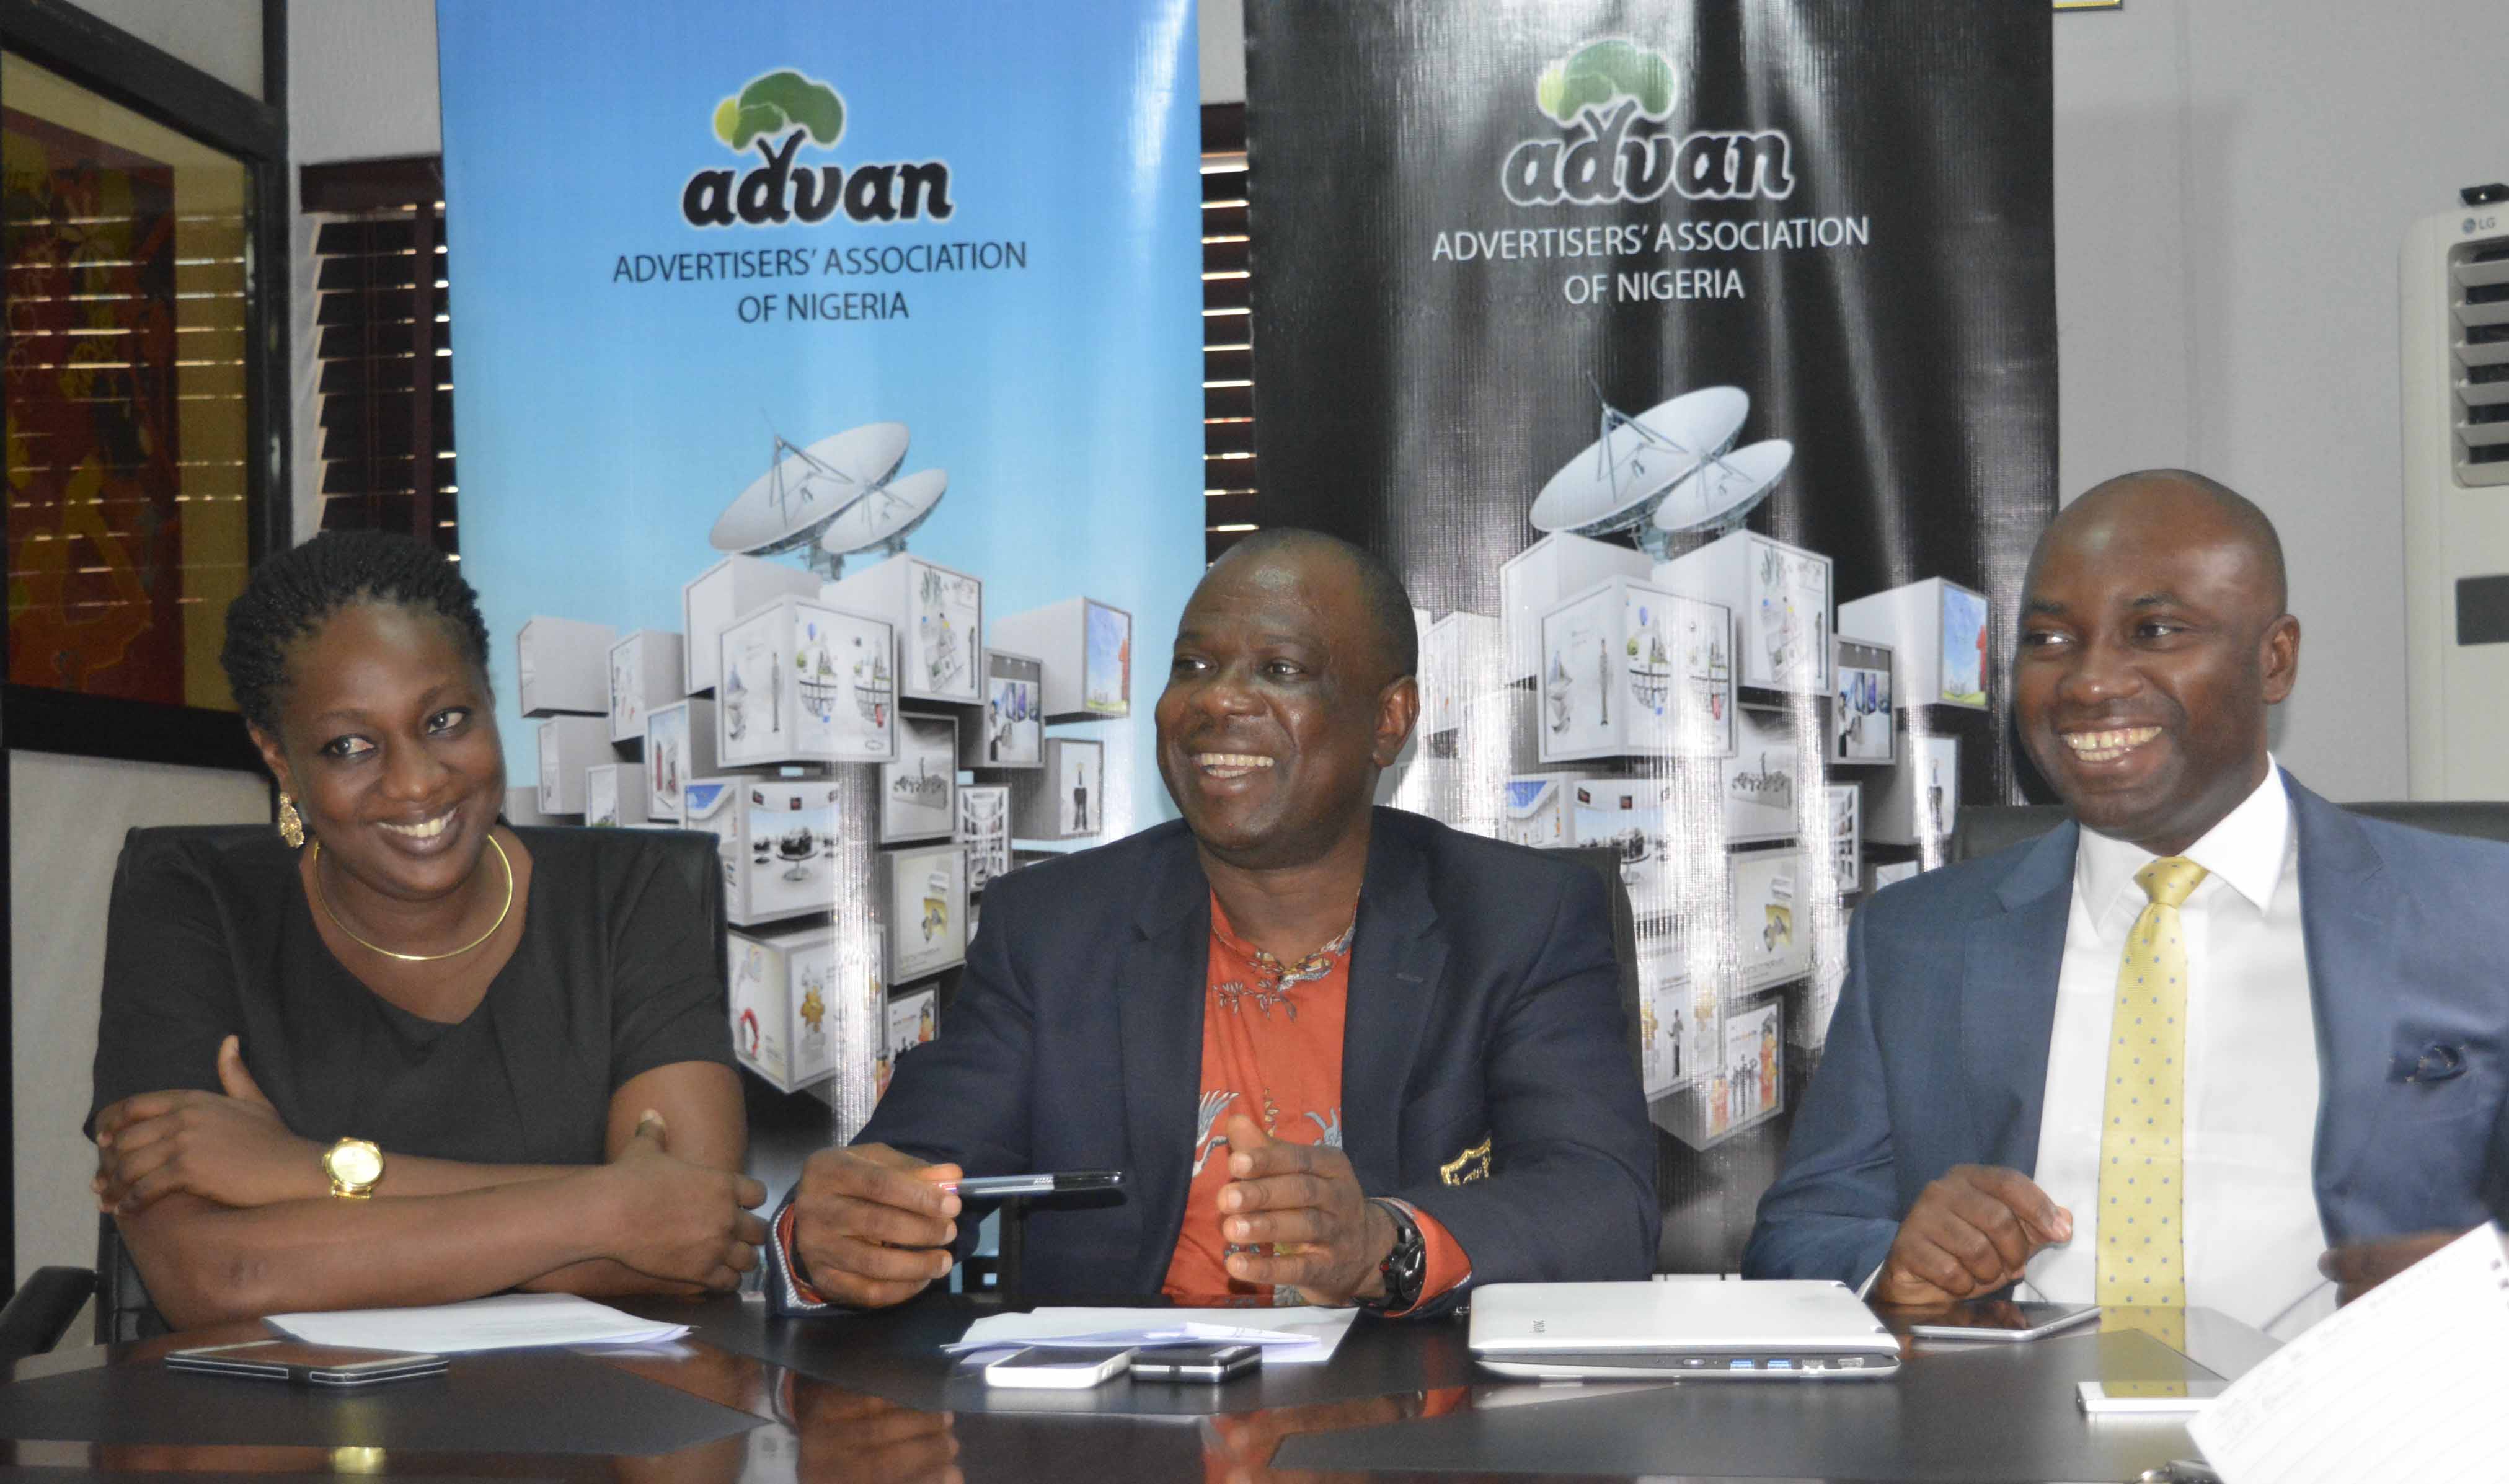 From Left: Ediri Ose-Ediale,  Executive Secretary, Advertisers Association of Nigeria (ADVAN), David Okeme, President of ADVAN and Sampson Oloche, ADVAN Publicity Secretary At the press briefing on ADVAN Marketers Conference 2016 held in Lagos on Tuesday 26/04/2016